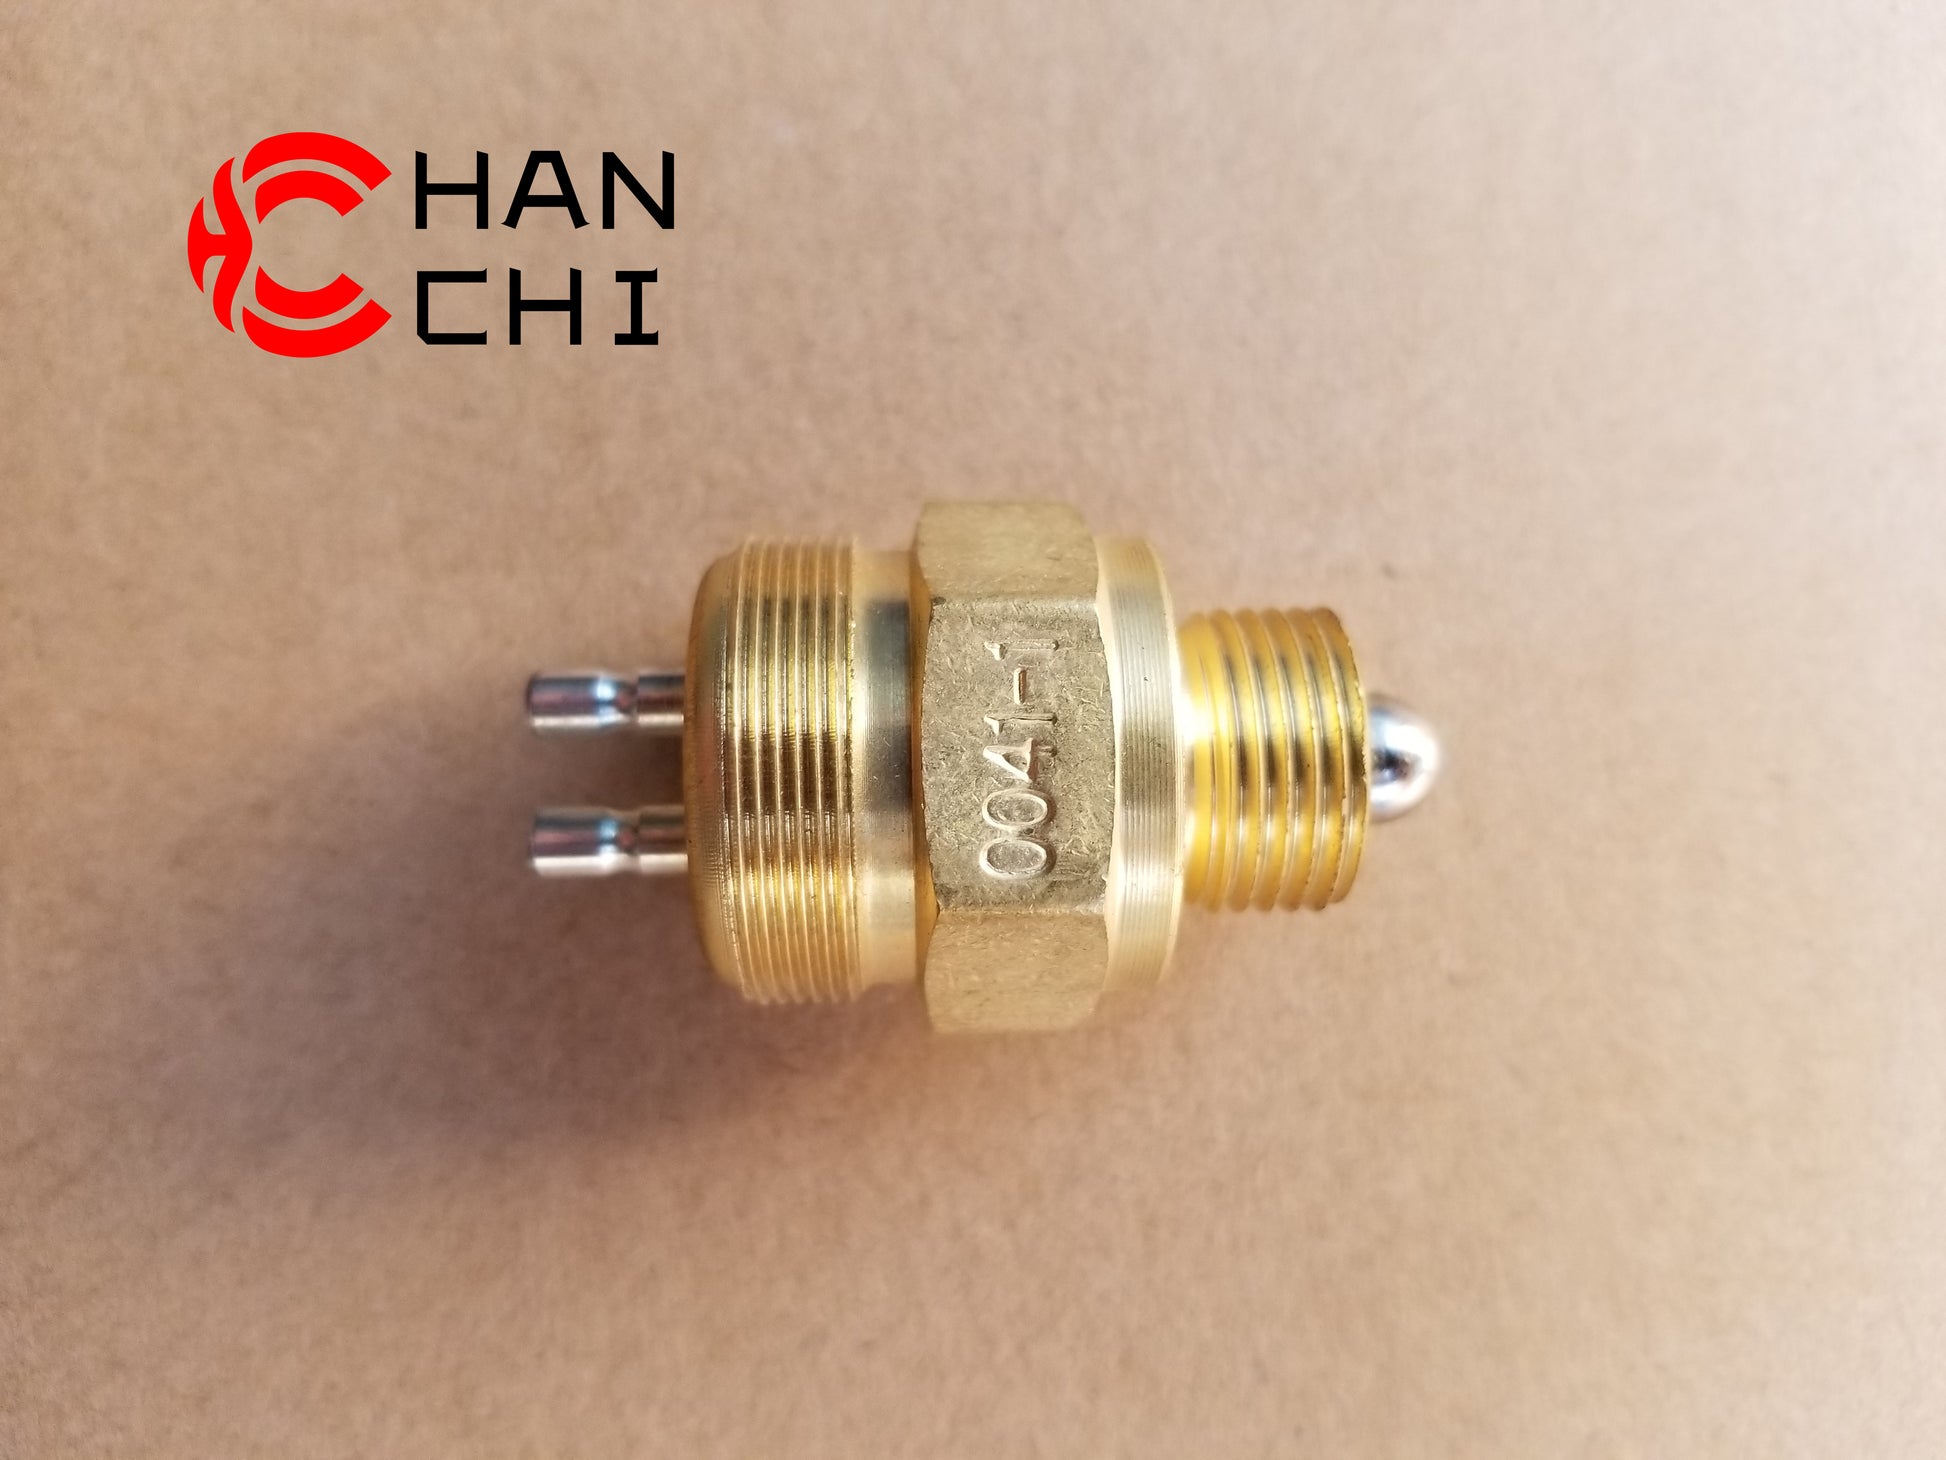 OEM: 0041-1 FAW FASTMaterial: metalColor: black goldenOrigin: Made in ChinaWeight: 50gPacking List: 1* Neutral Switch More Service We can provide OEM Manufacturing service We can Be your one-step solution for Auto Parts We can provide technical scheme for you Feel Free to Contact Us, We will get back to you as soon as possible.